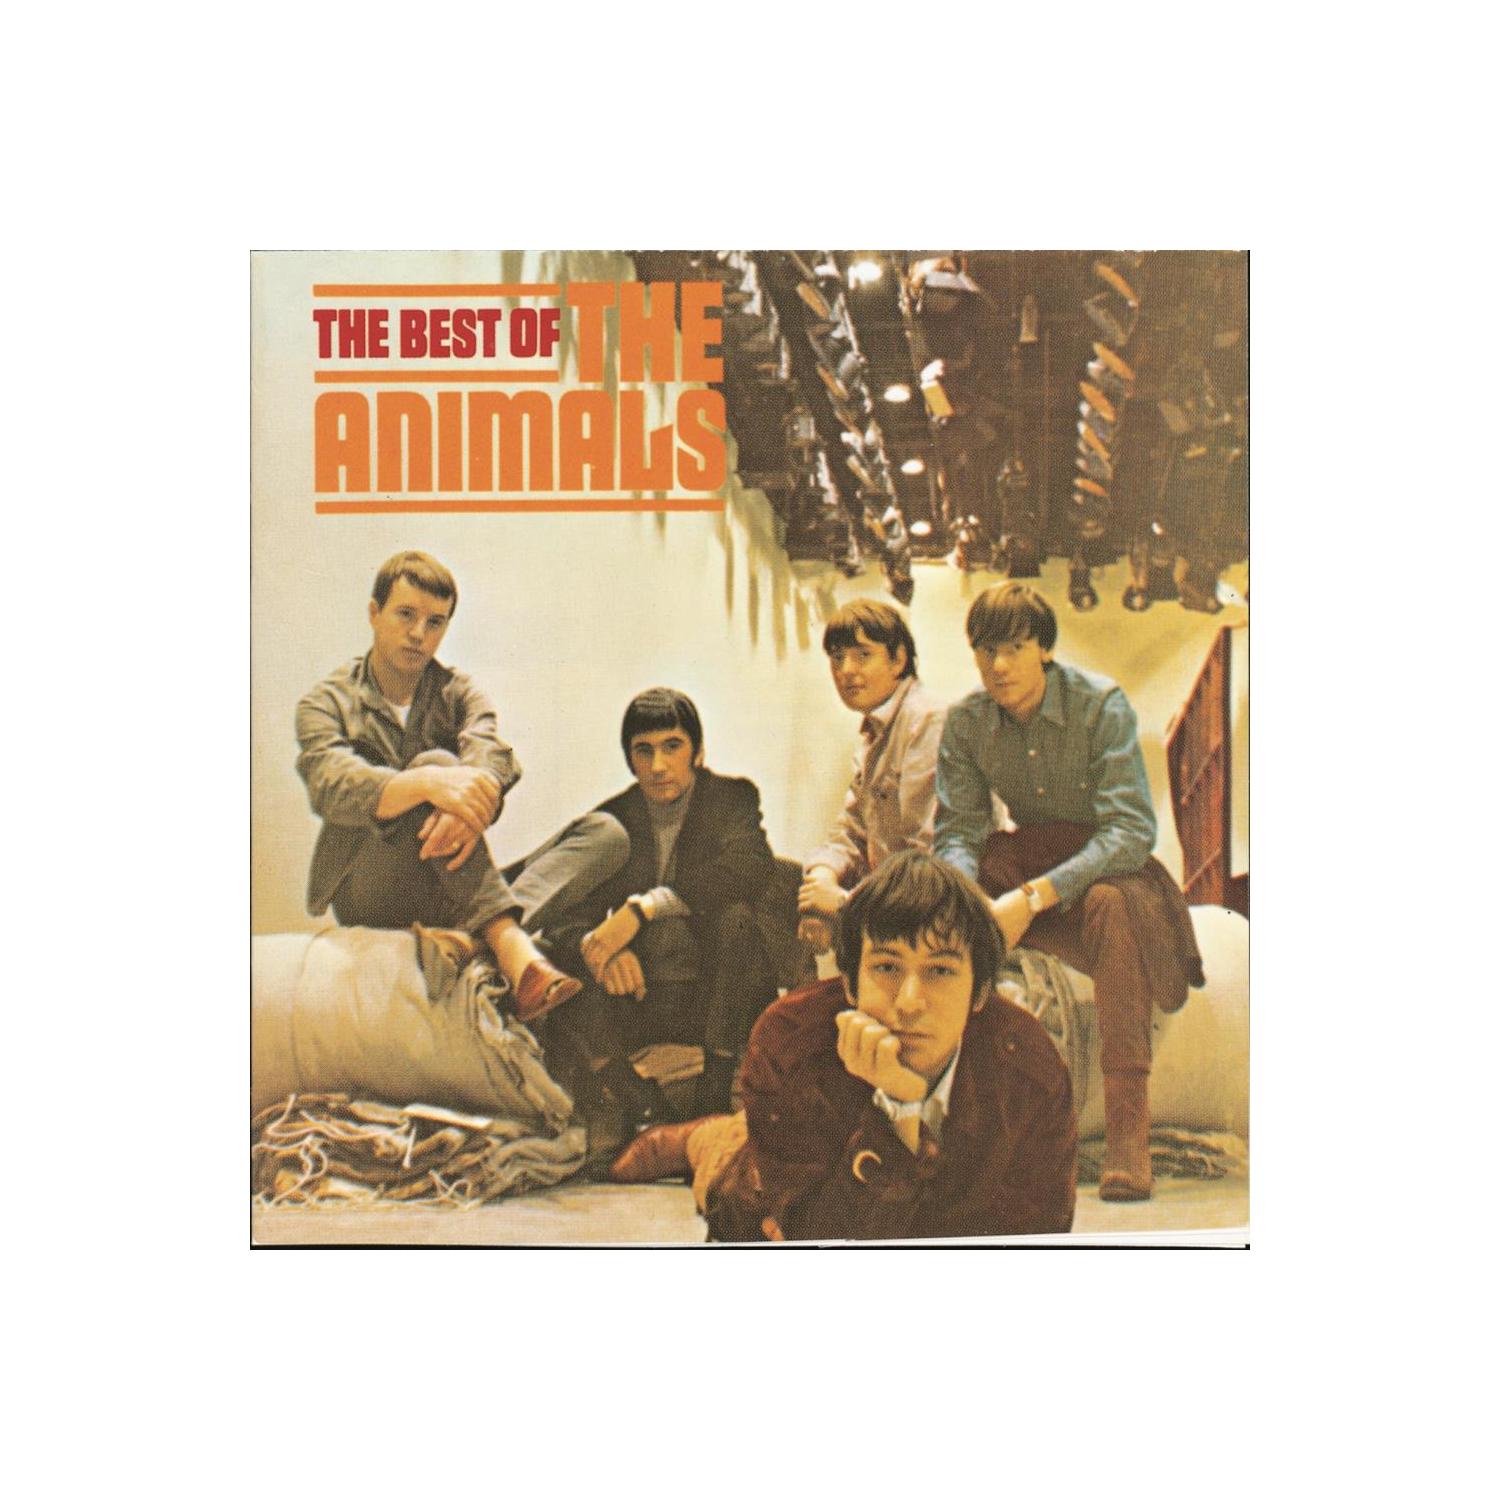 BEST OF THE ANIMALS -- ANIMALS THE